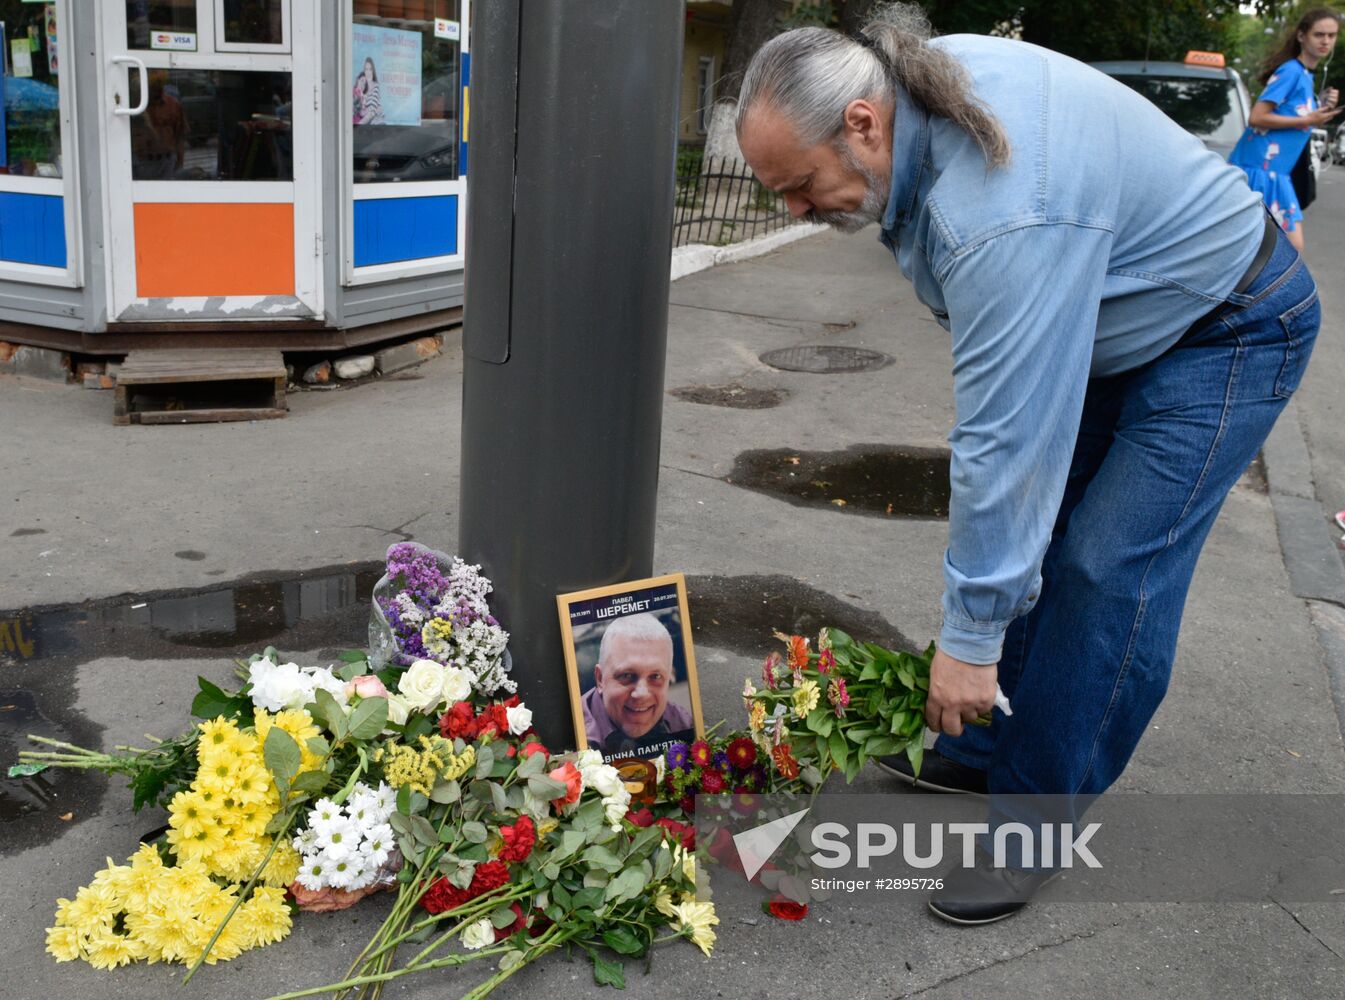 Flowers and candles on the site of murder of journalist Pavel Sheremet in Kiev